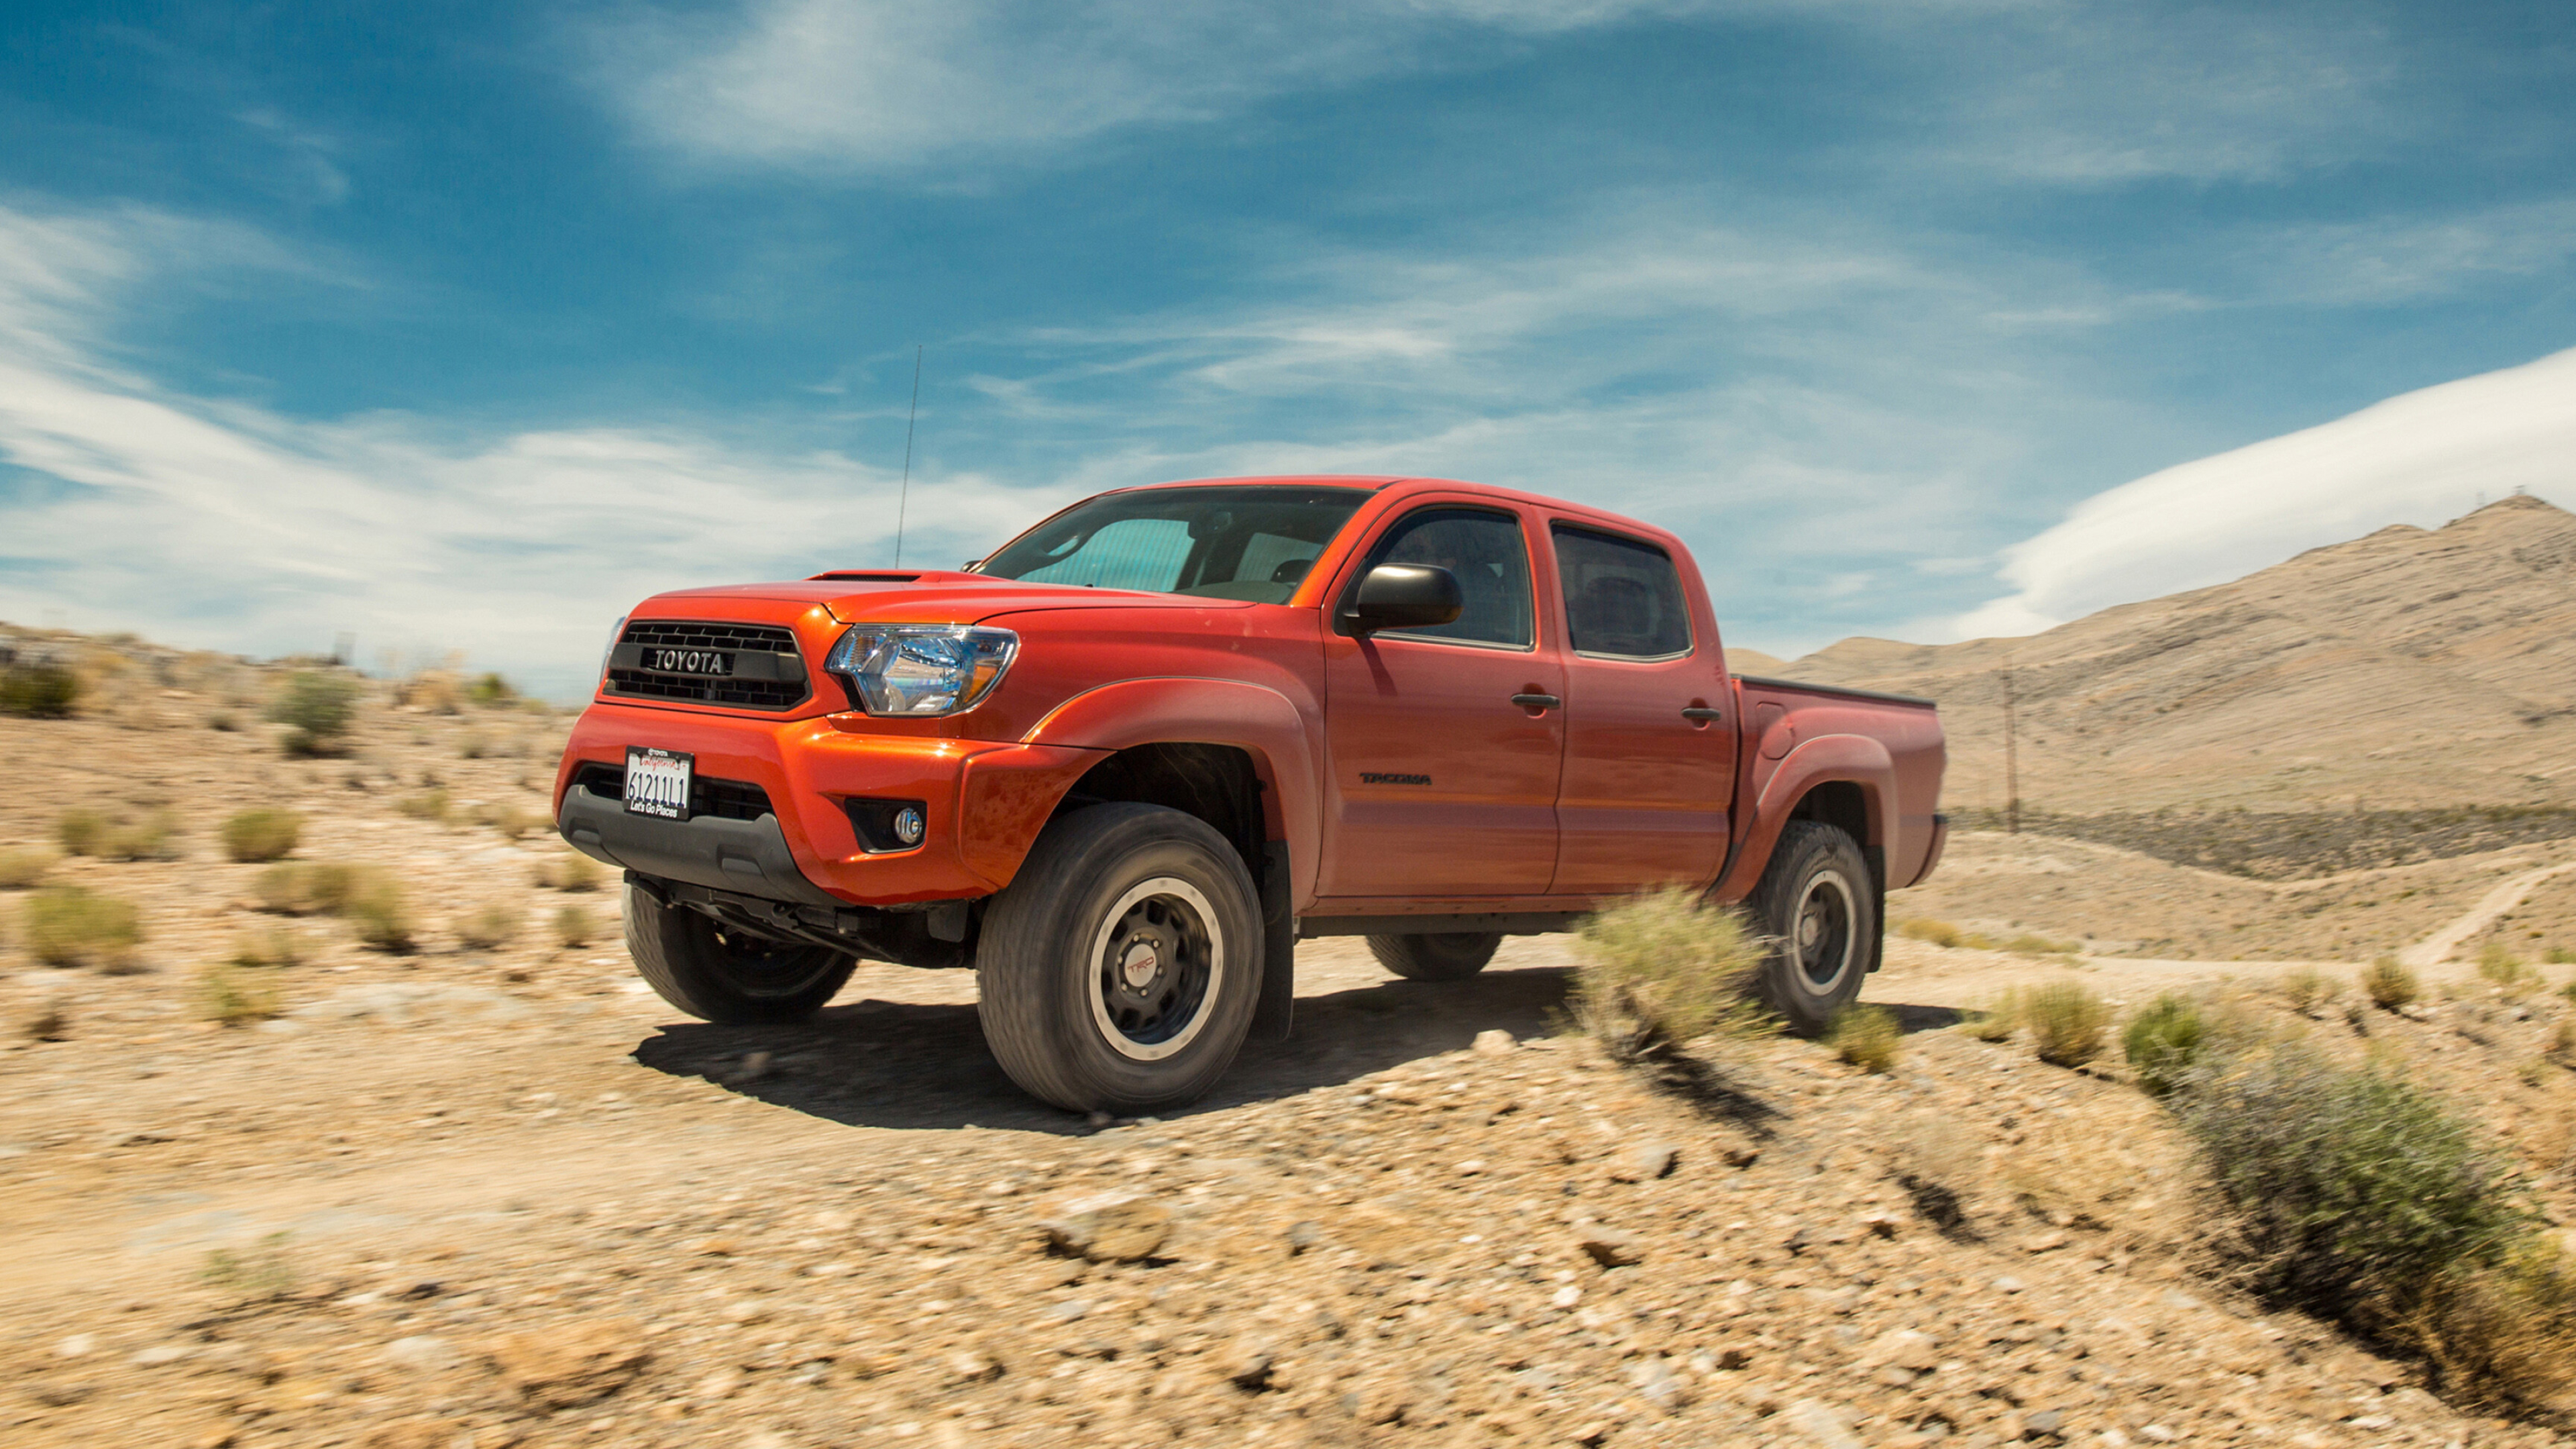 Toyota Tacoma: Cars, TRD Pro Double Cab model, Japanese off-road cars. 3840x2160 4K Wallpaper.